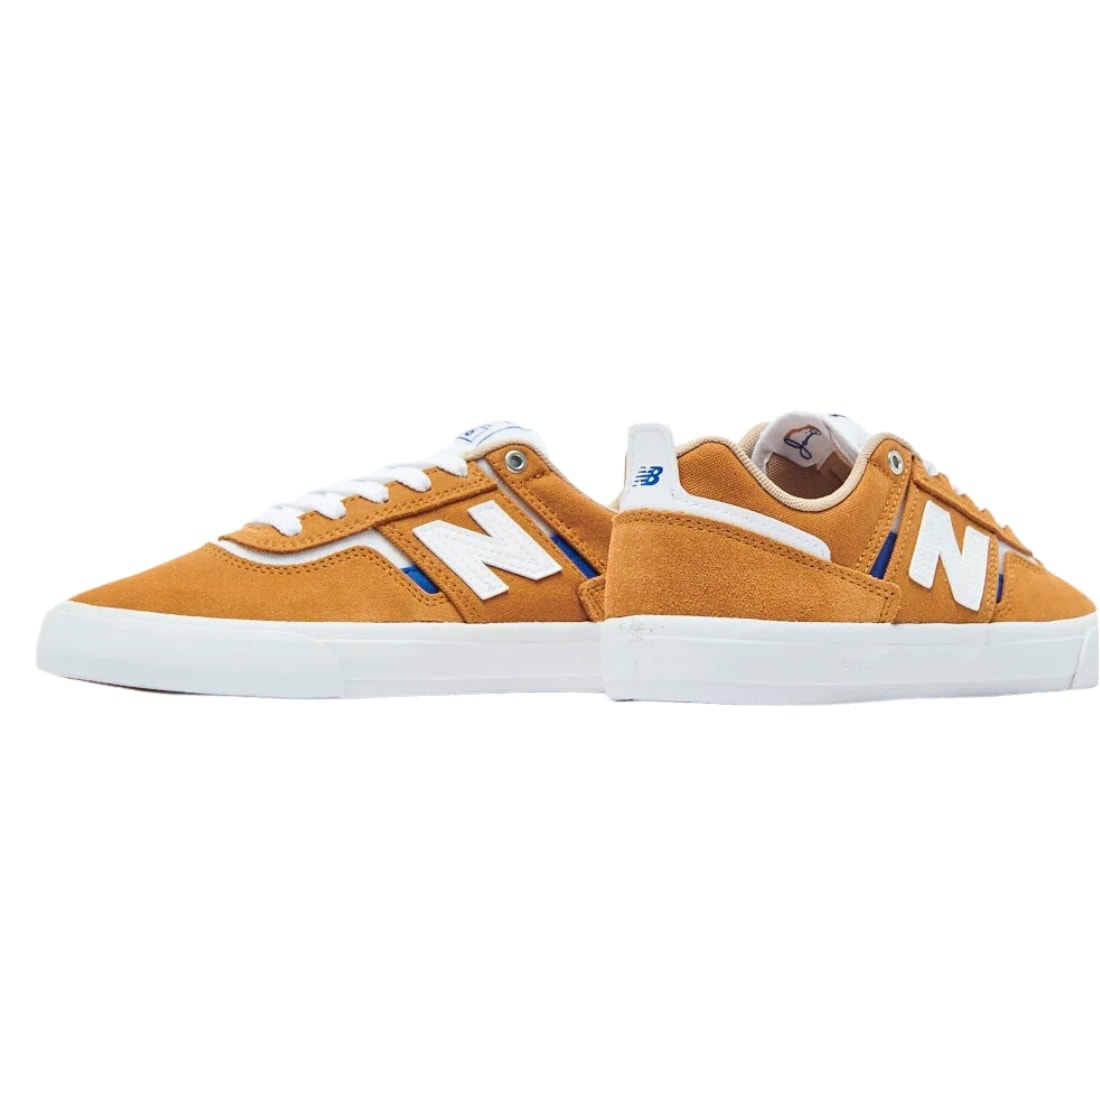 New Balance Numeric NM306 Jamie Foy Skate Shoes - Curry/White